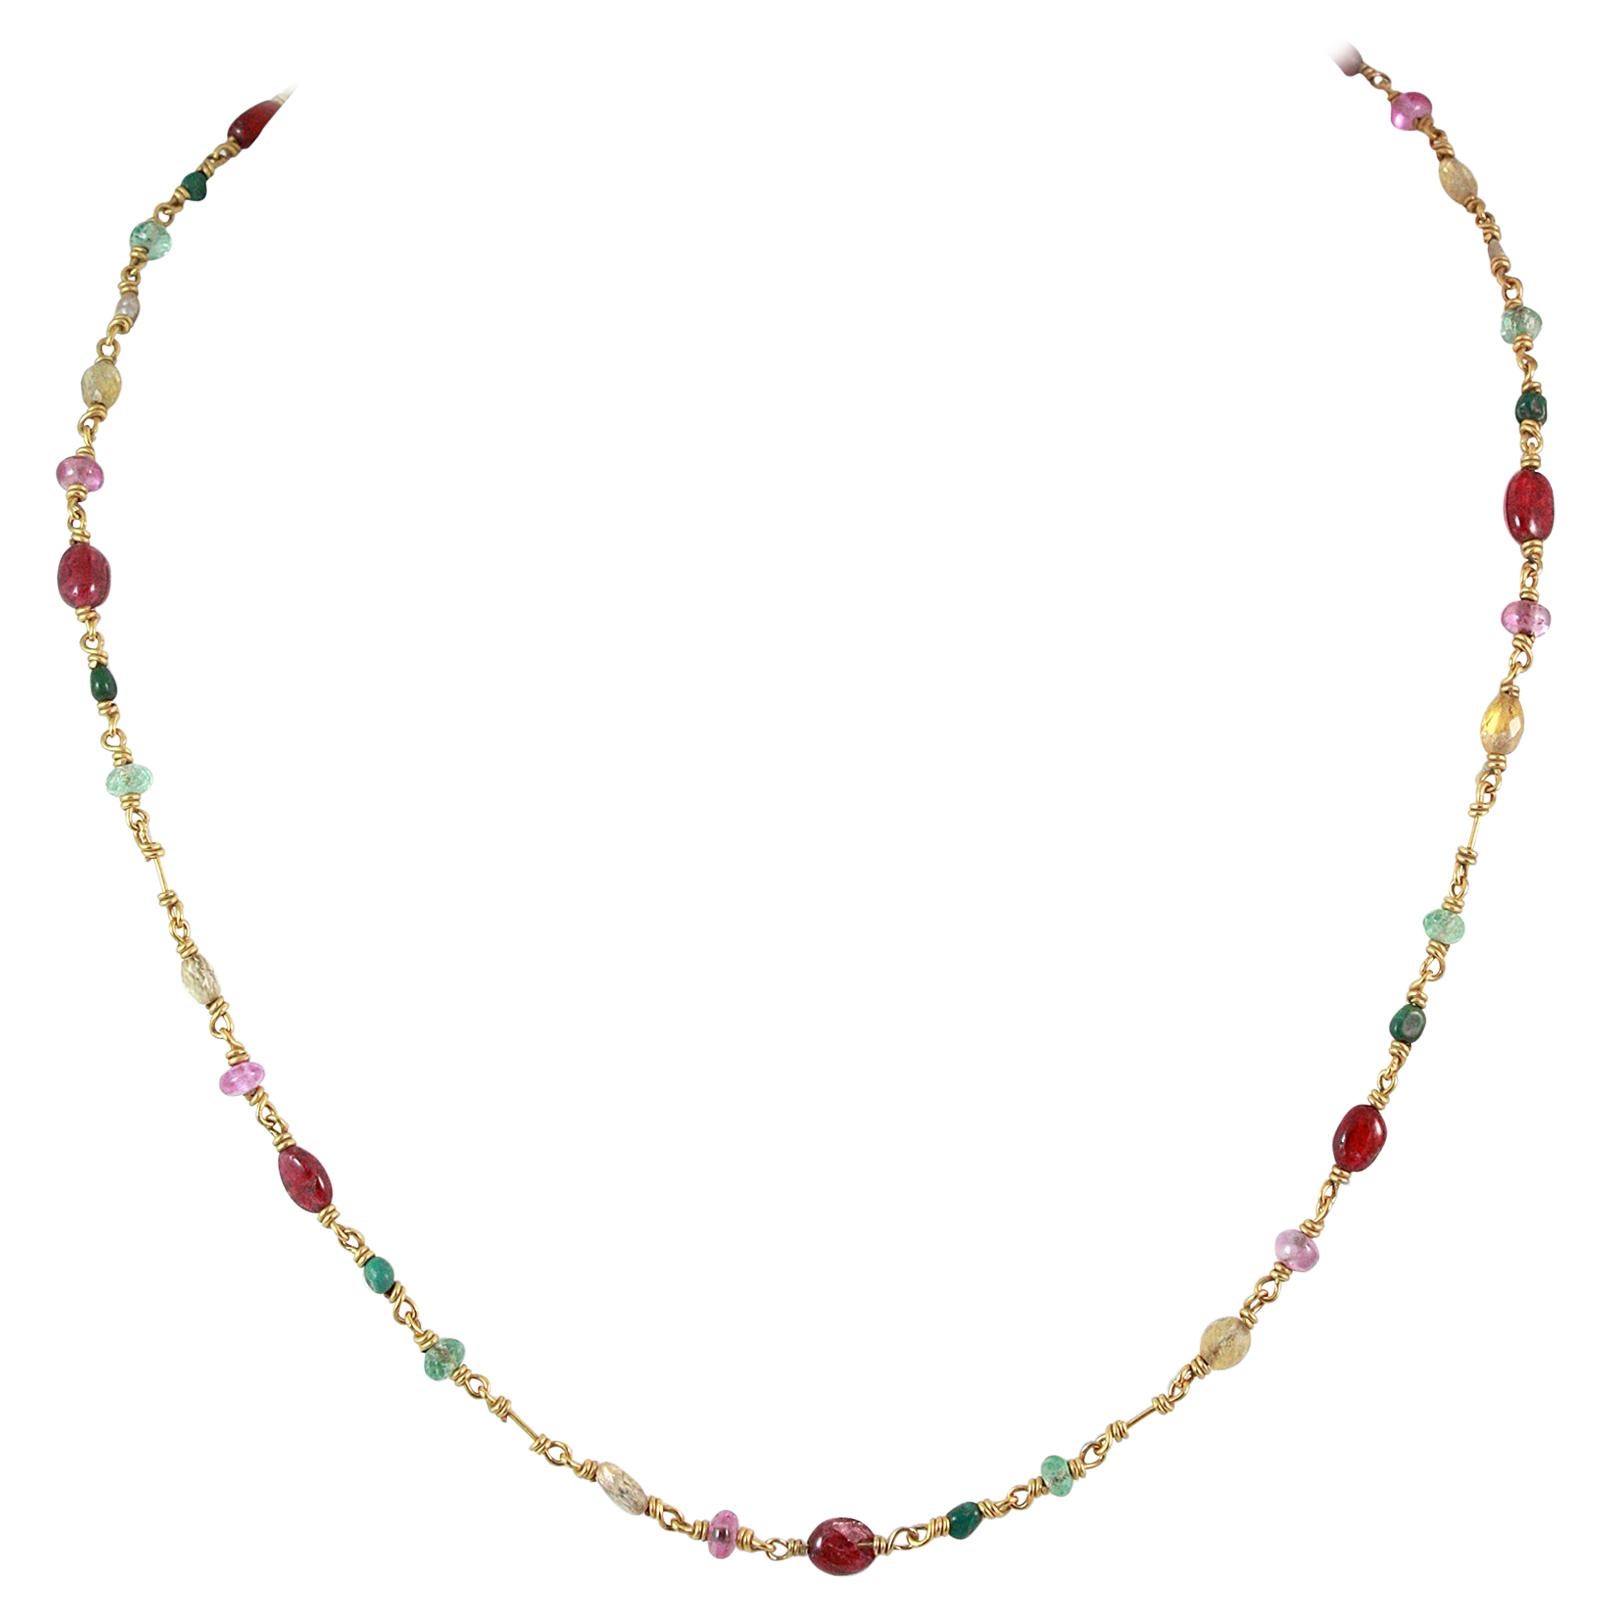 Reinstein Ross, Isabella Necklace 20K Gold with Rubies, Emerald and Tourmalines